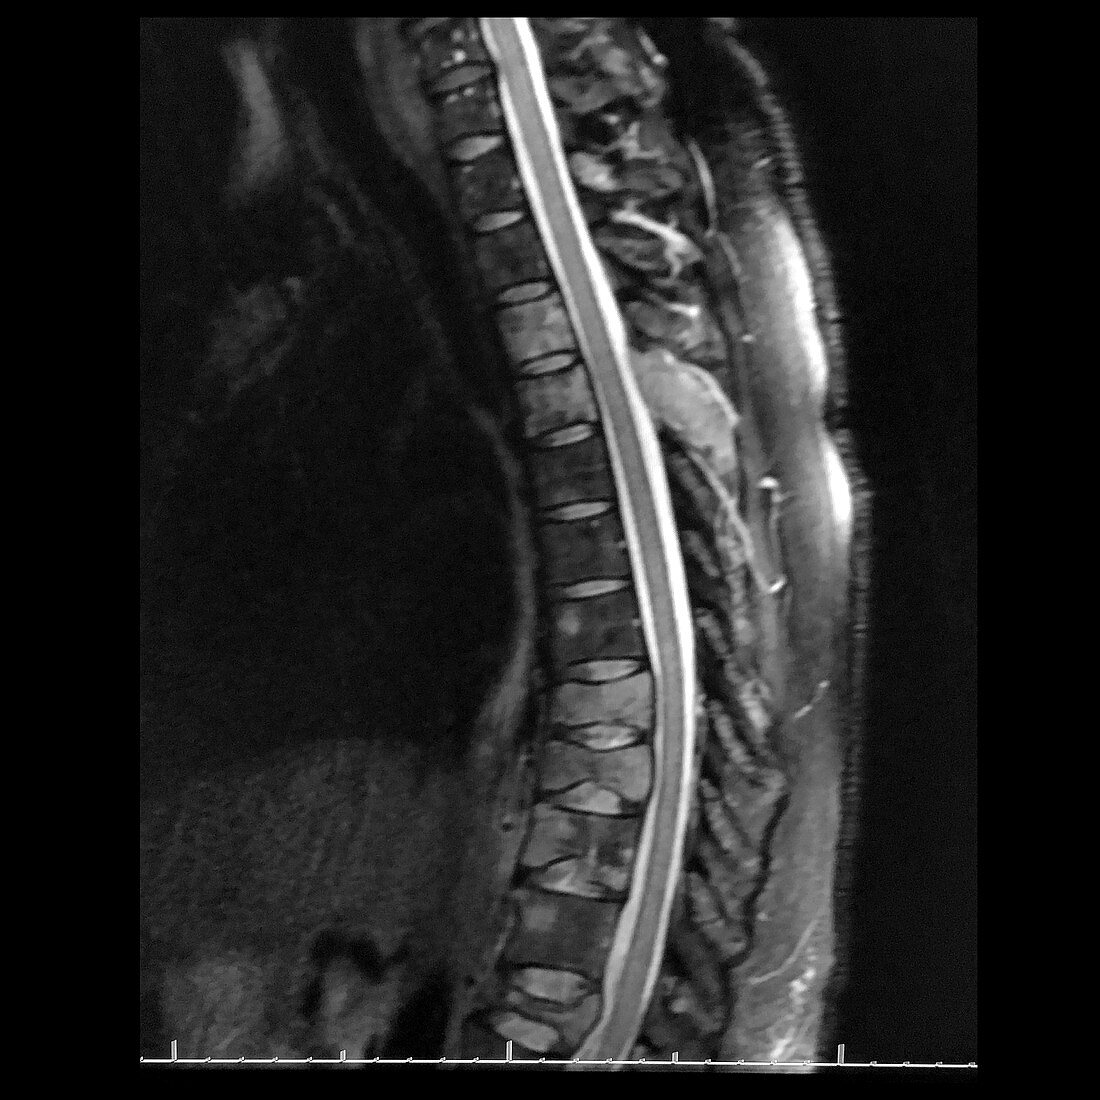 Metastatic Lung Cancer to Thoracic Spine, MRI